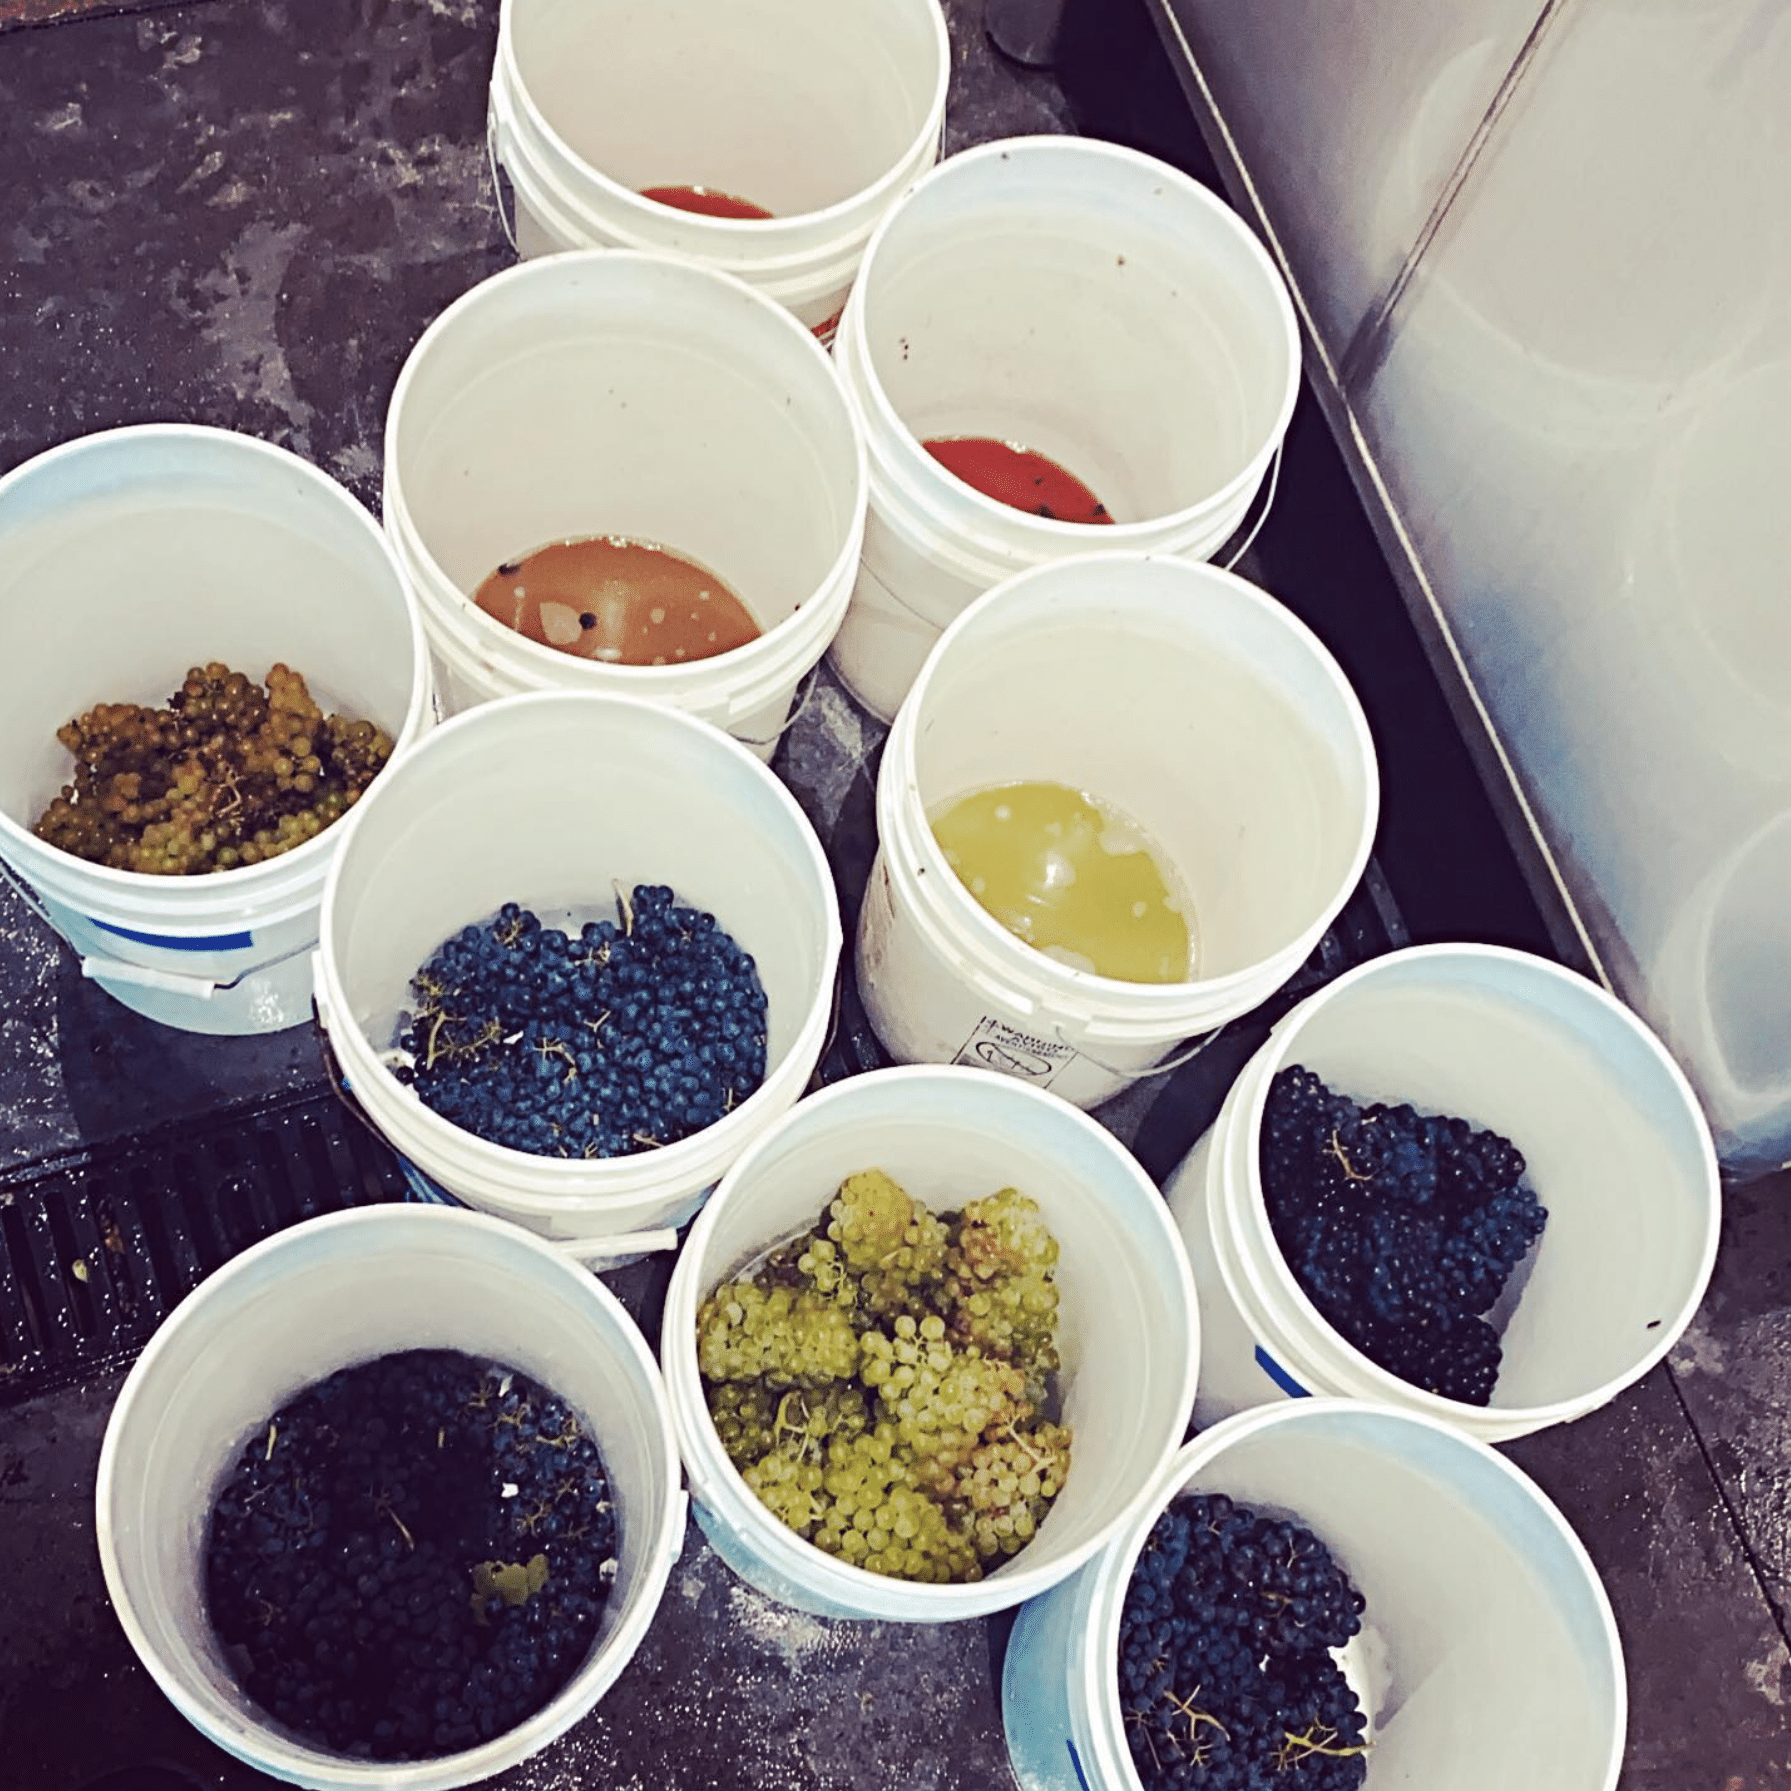 Lab testing and analysis of grapes from SAMsARA Wine Co.